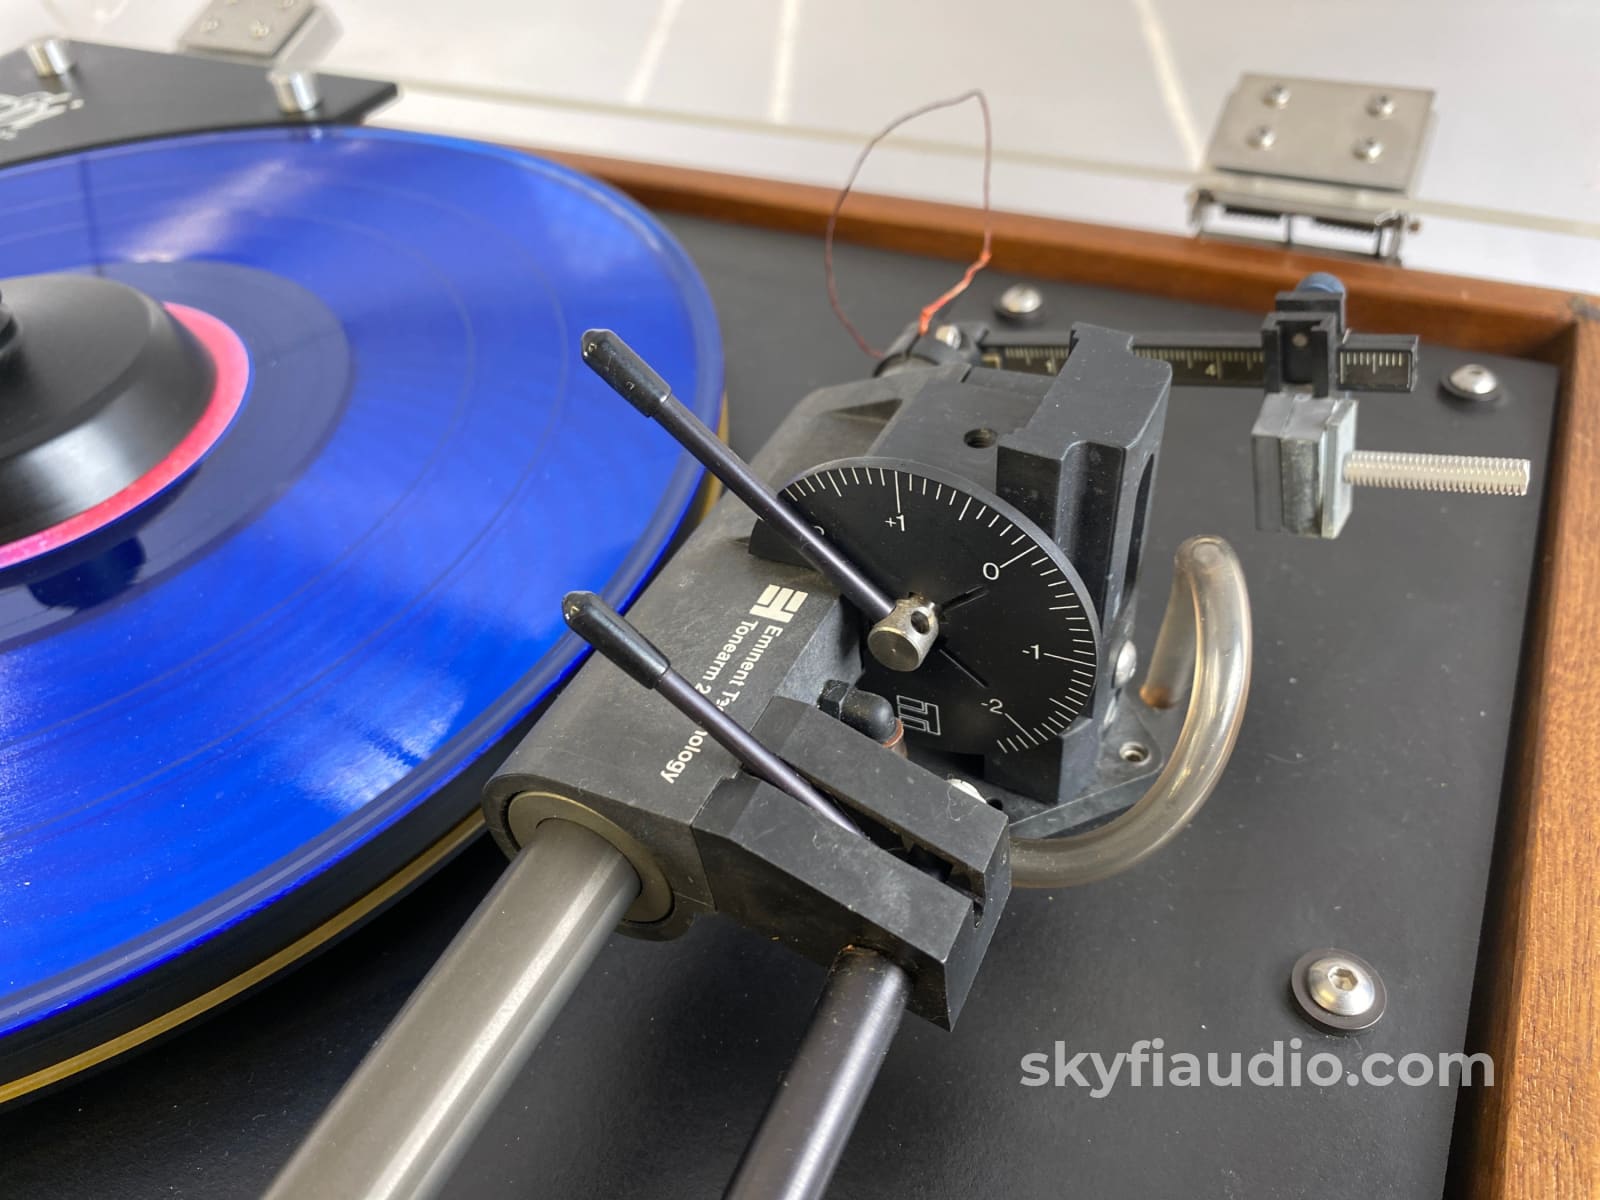 Vpi Hw-19 Turntable With Tangential Tonearm And Pump - In Dark Mahogany With New Sumiko Cartridge